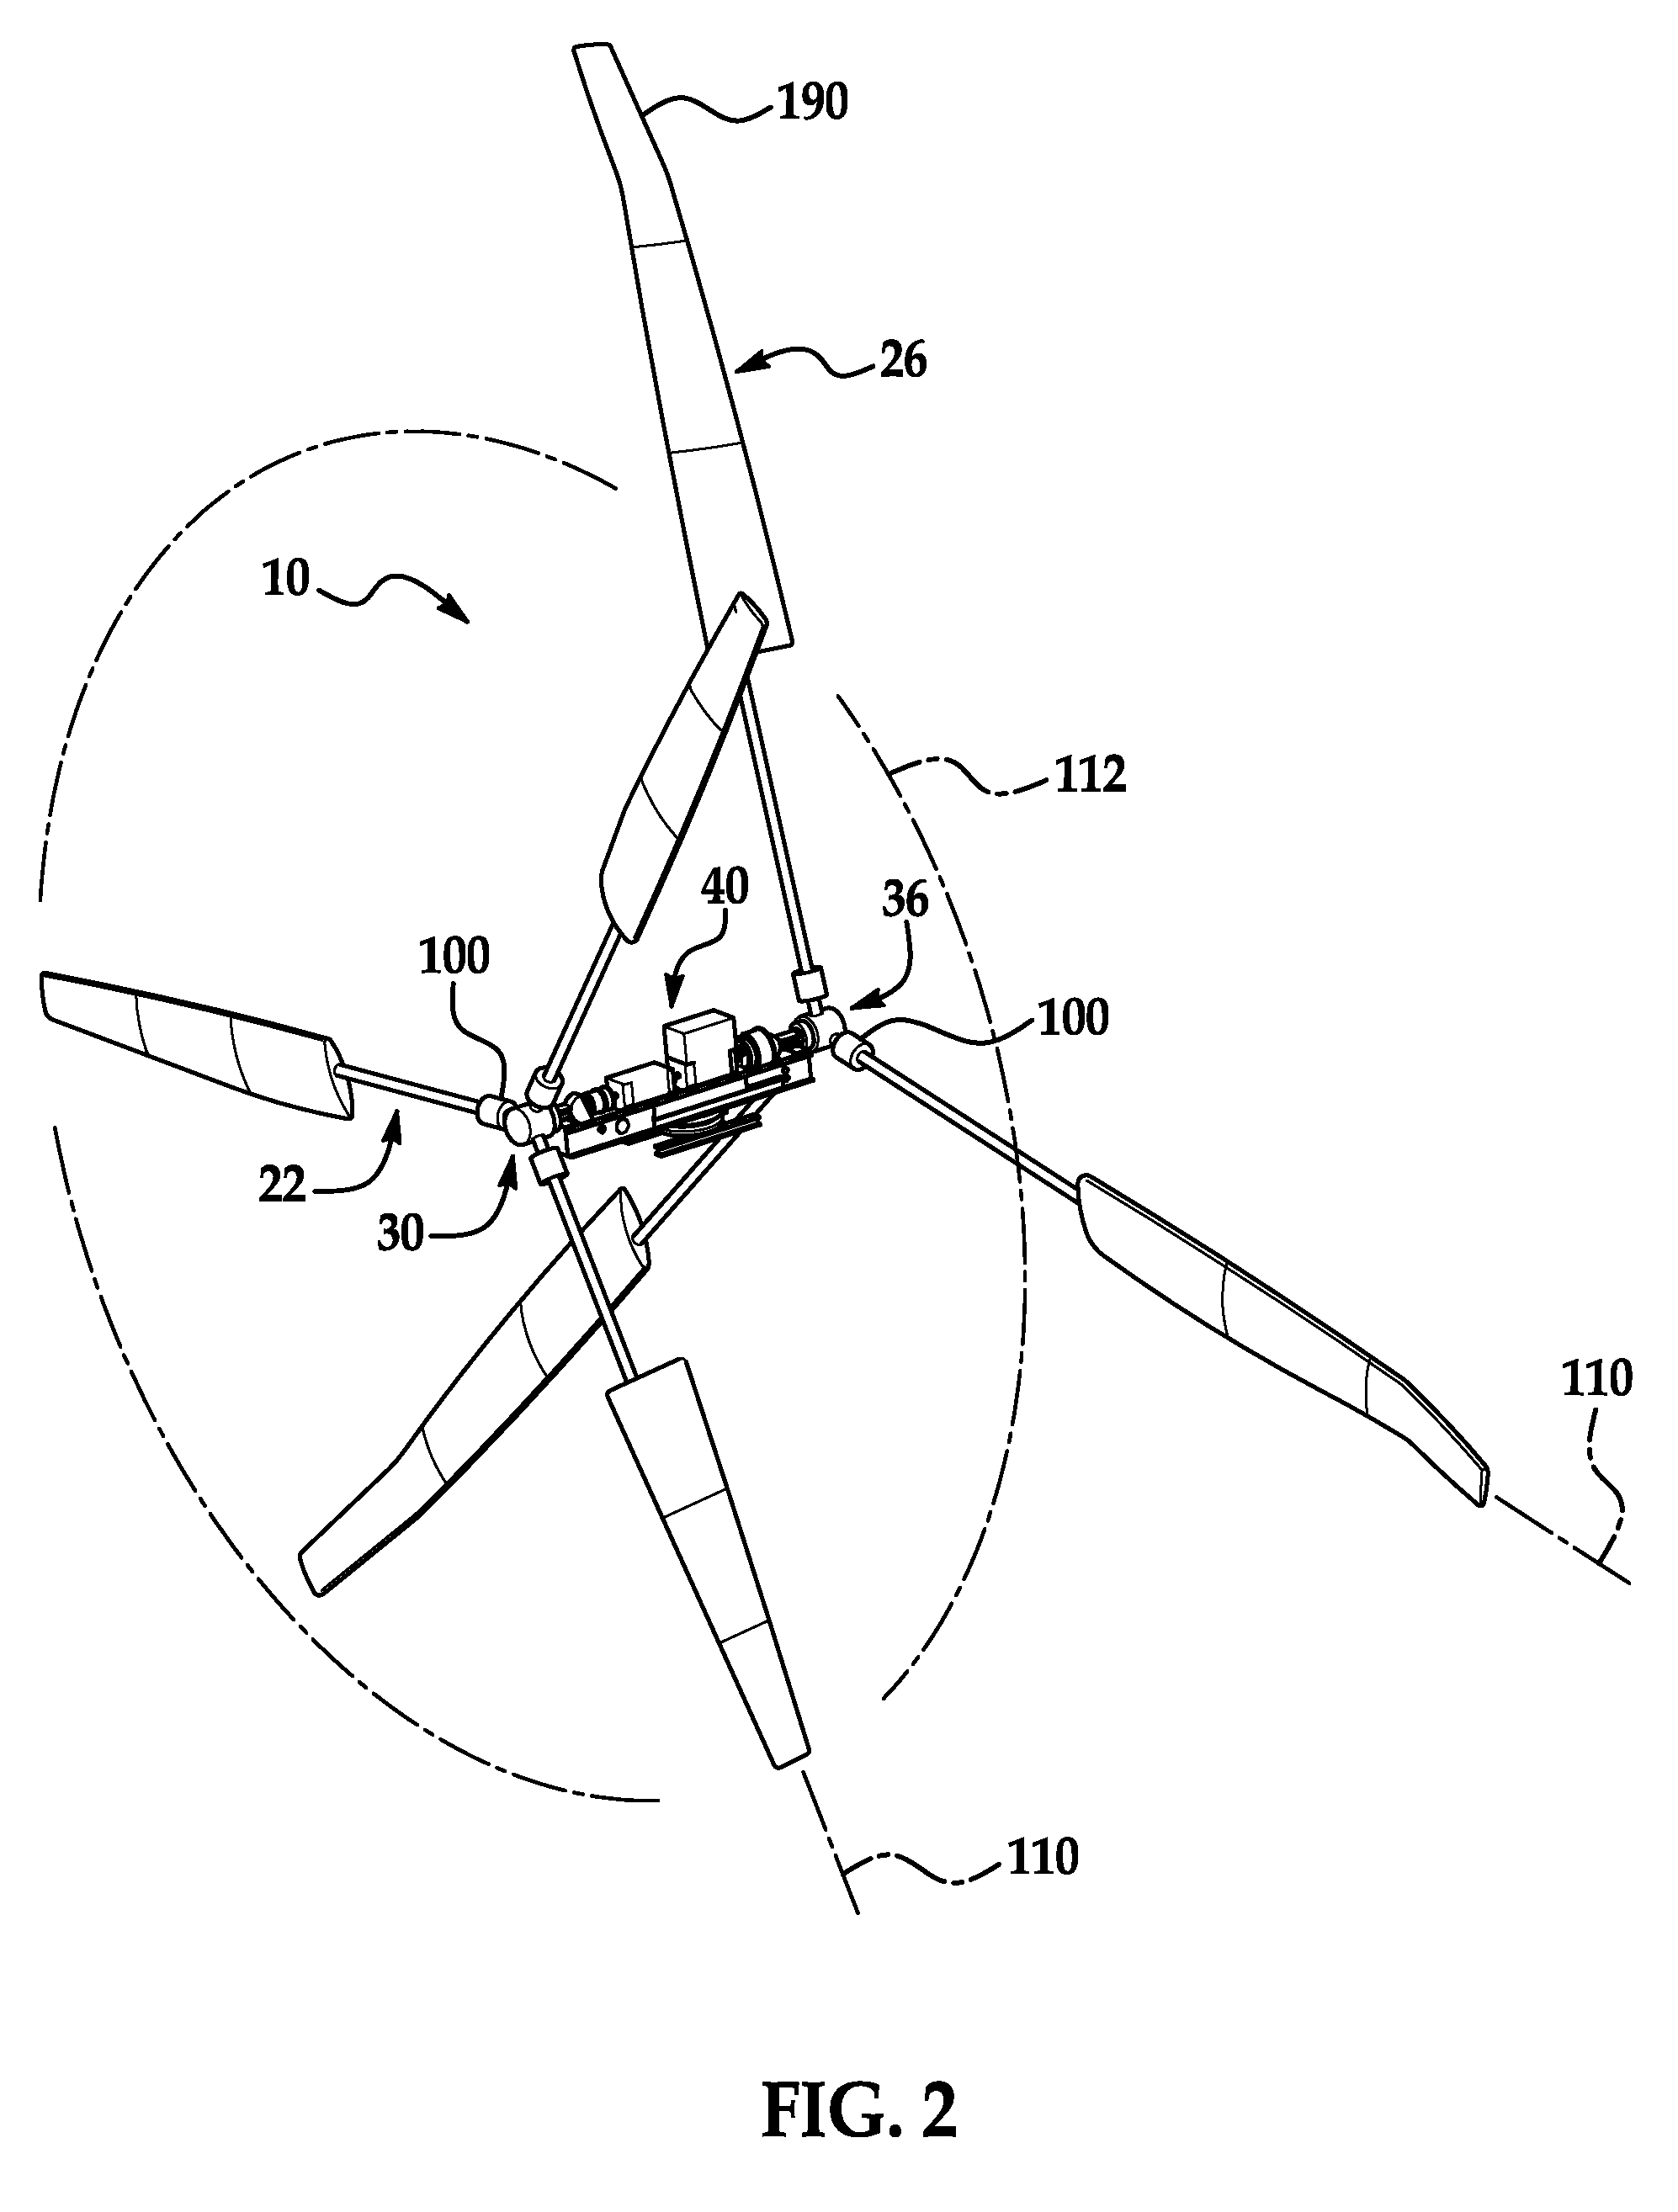 Independent variable blade pitch and geometry wind turbine